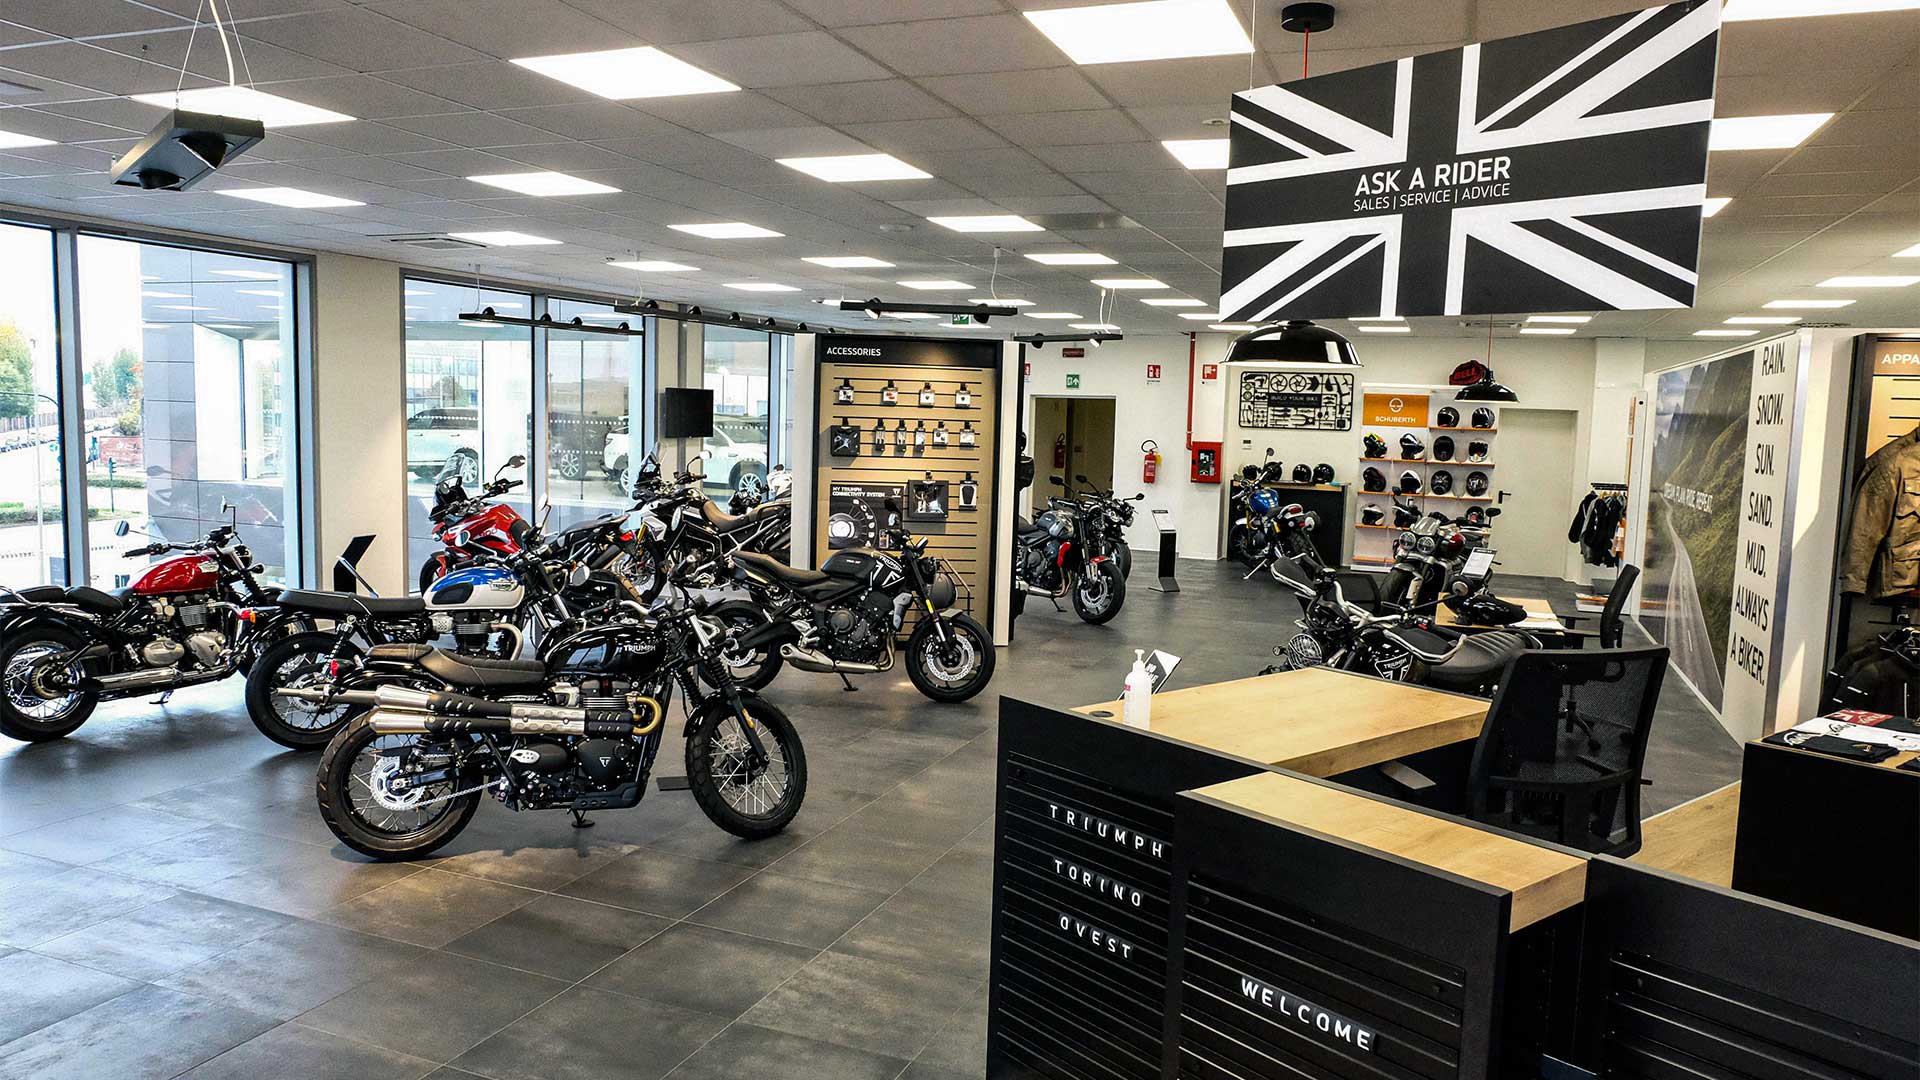 Triumph motorcycles dealership in Torino Ovest